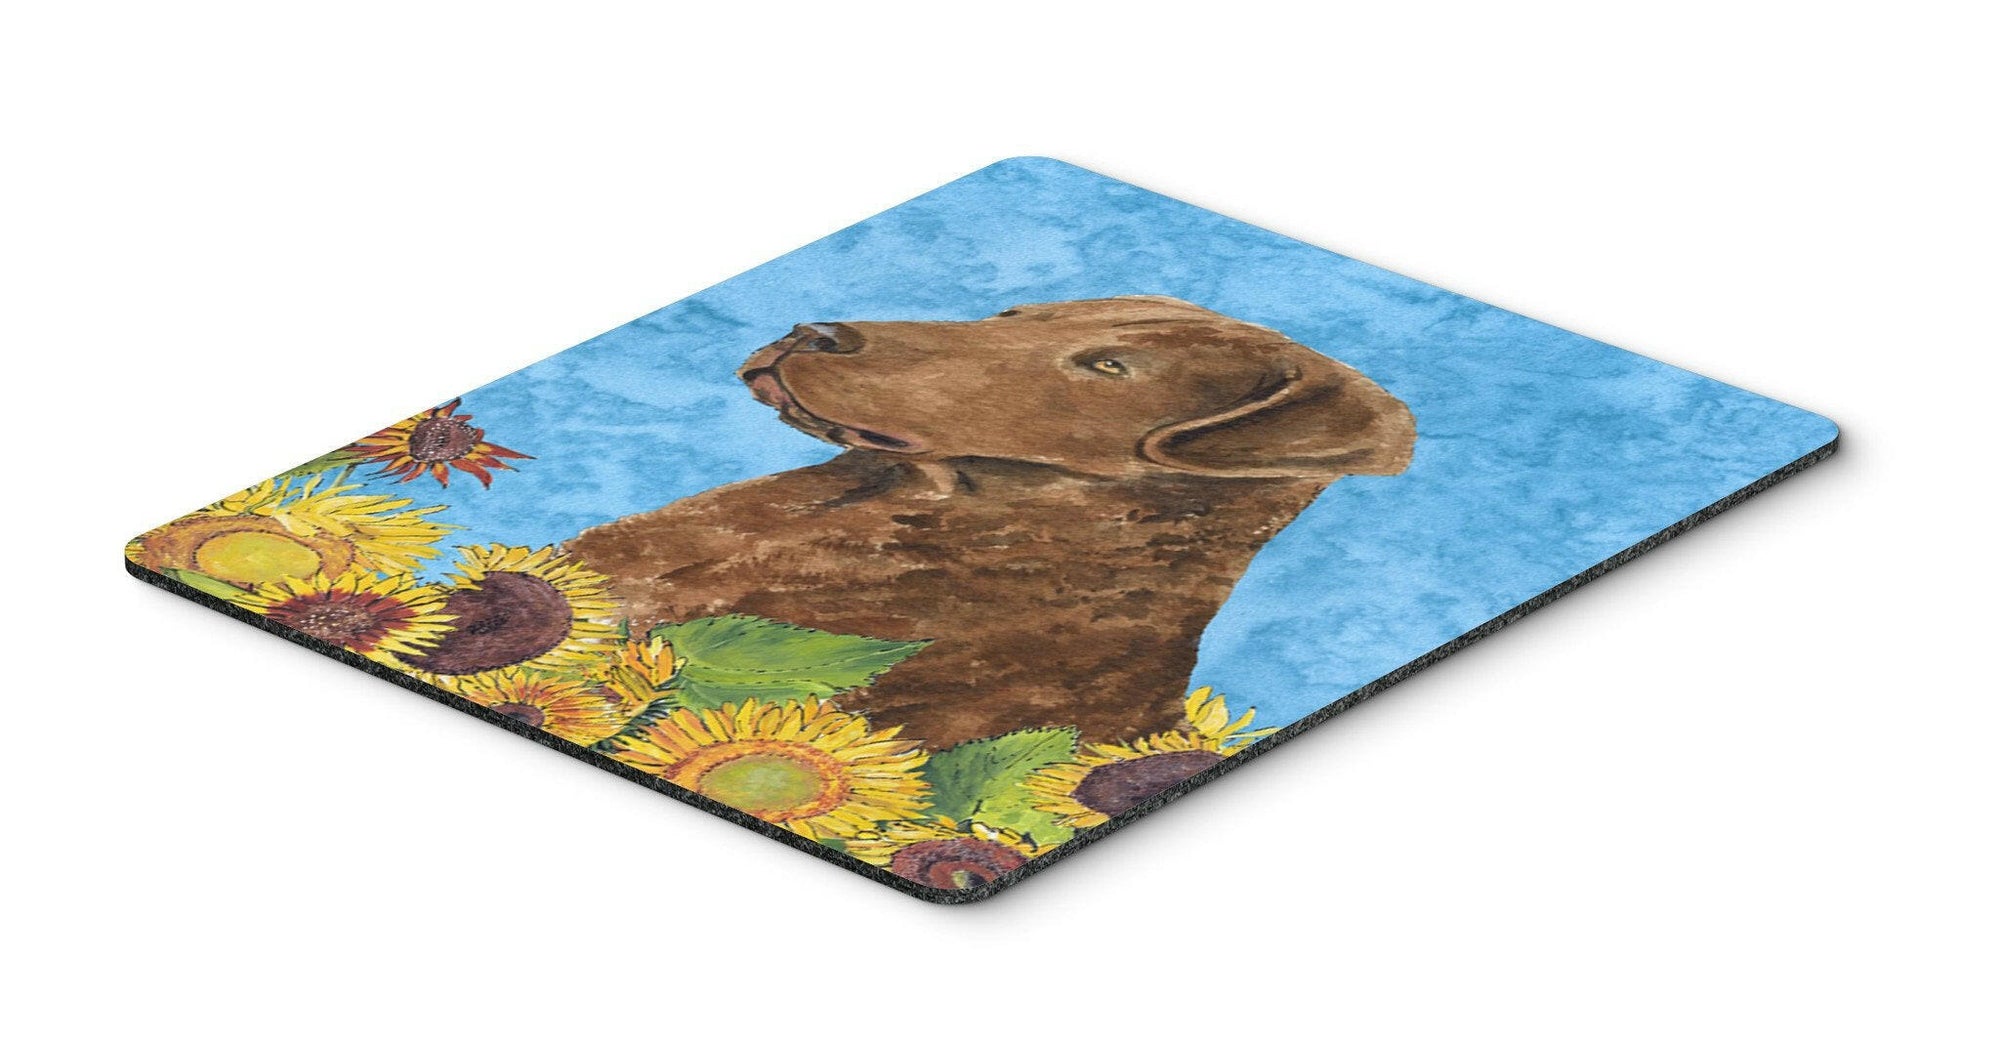 Curly Coated Retriever Mouse Pad, Hot Pad or Trivet by Caroline's Treasures